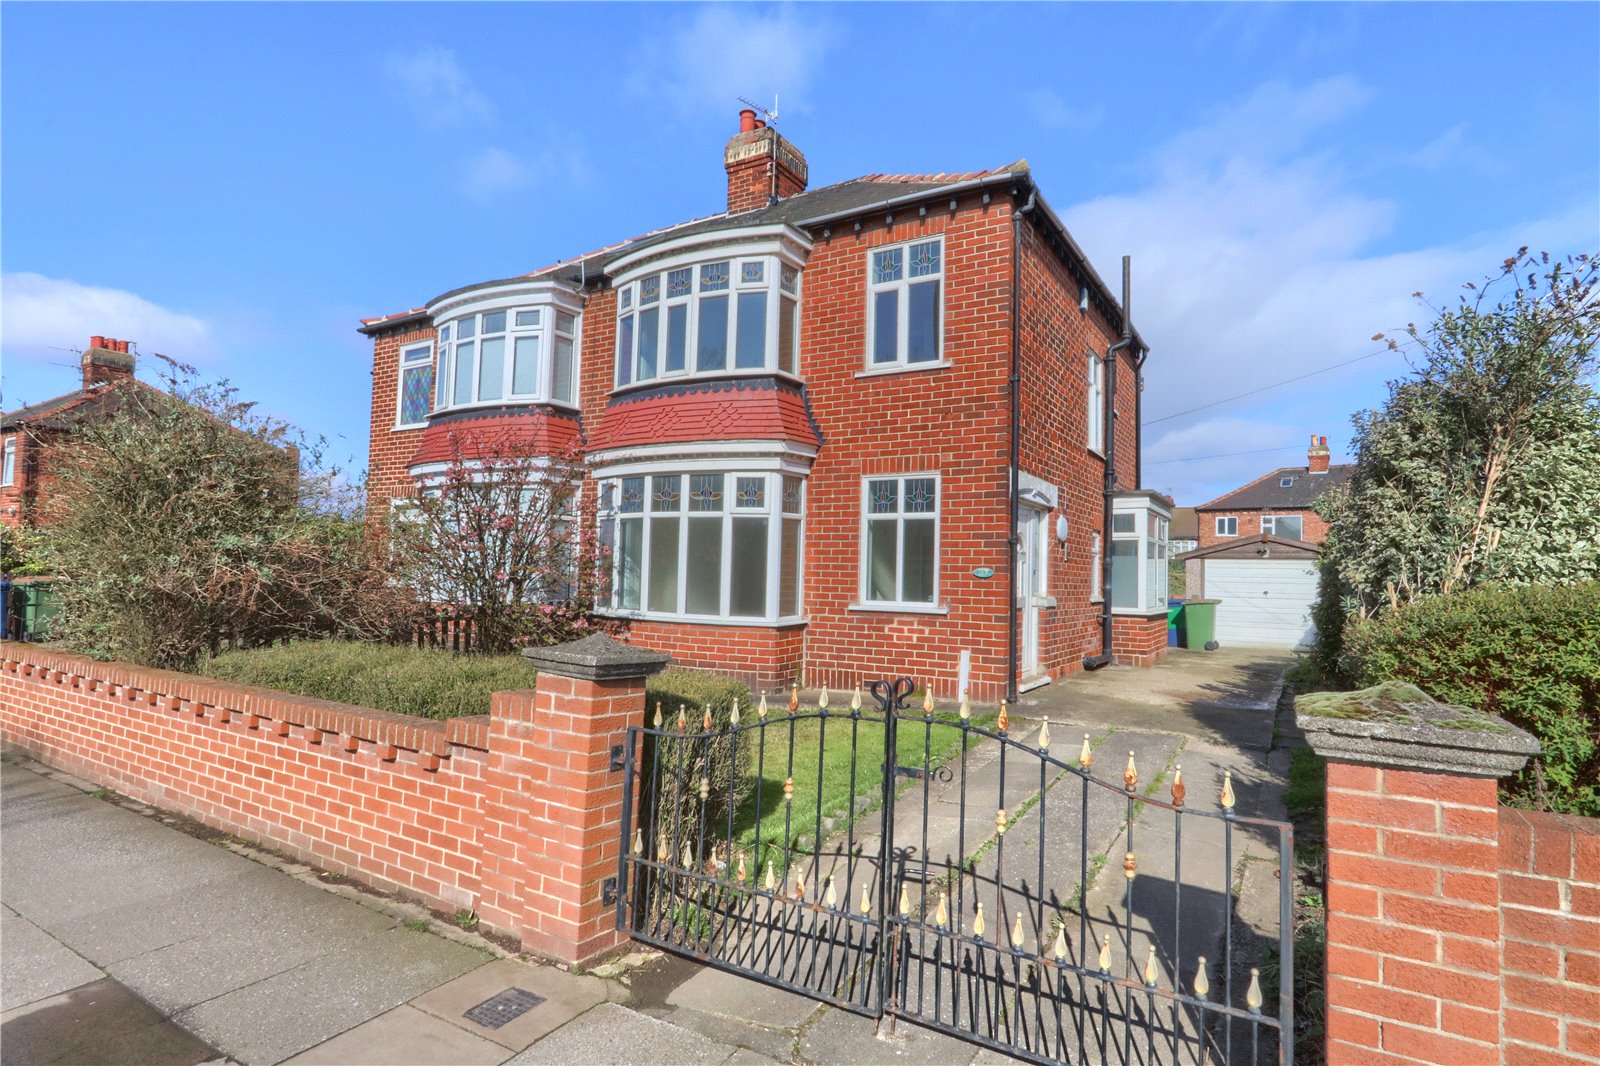 3 bed house for sale in Corporation Road, Redcar - Property Image 1